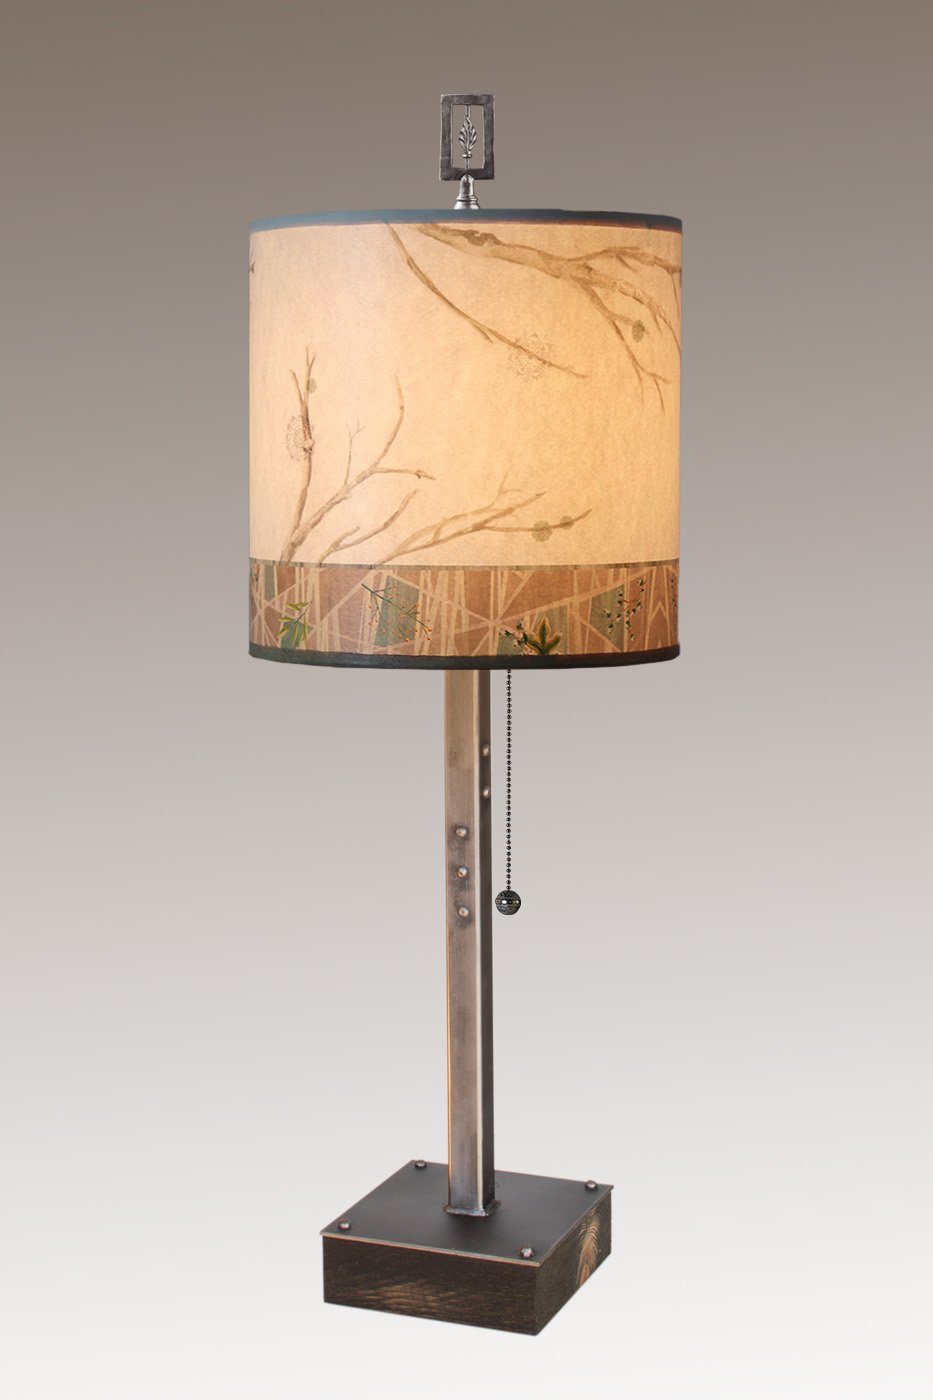 Janna Ugone &amp; Co Table Lamps Steel Table Lamp on Wood with Medium Drum Shade in Prism Branch